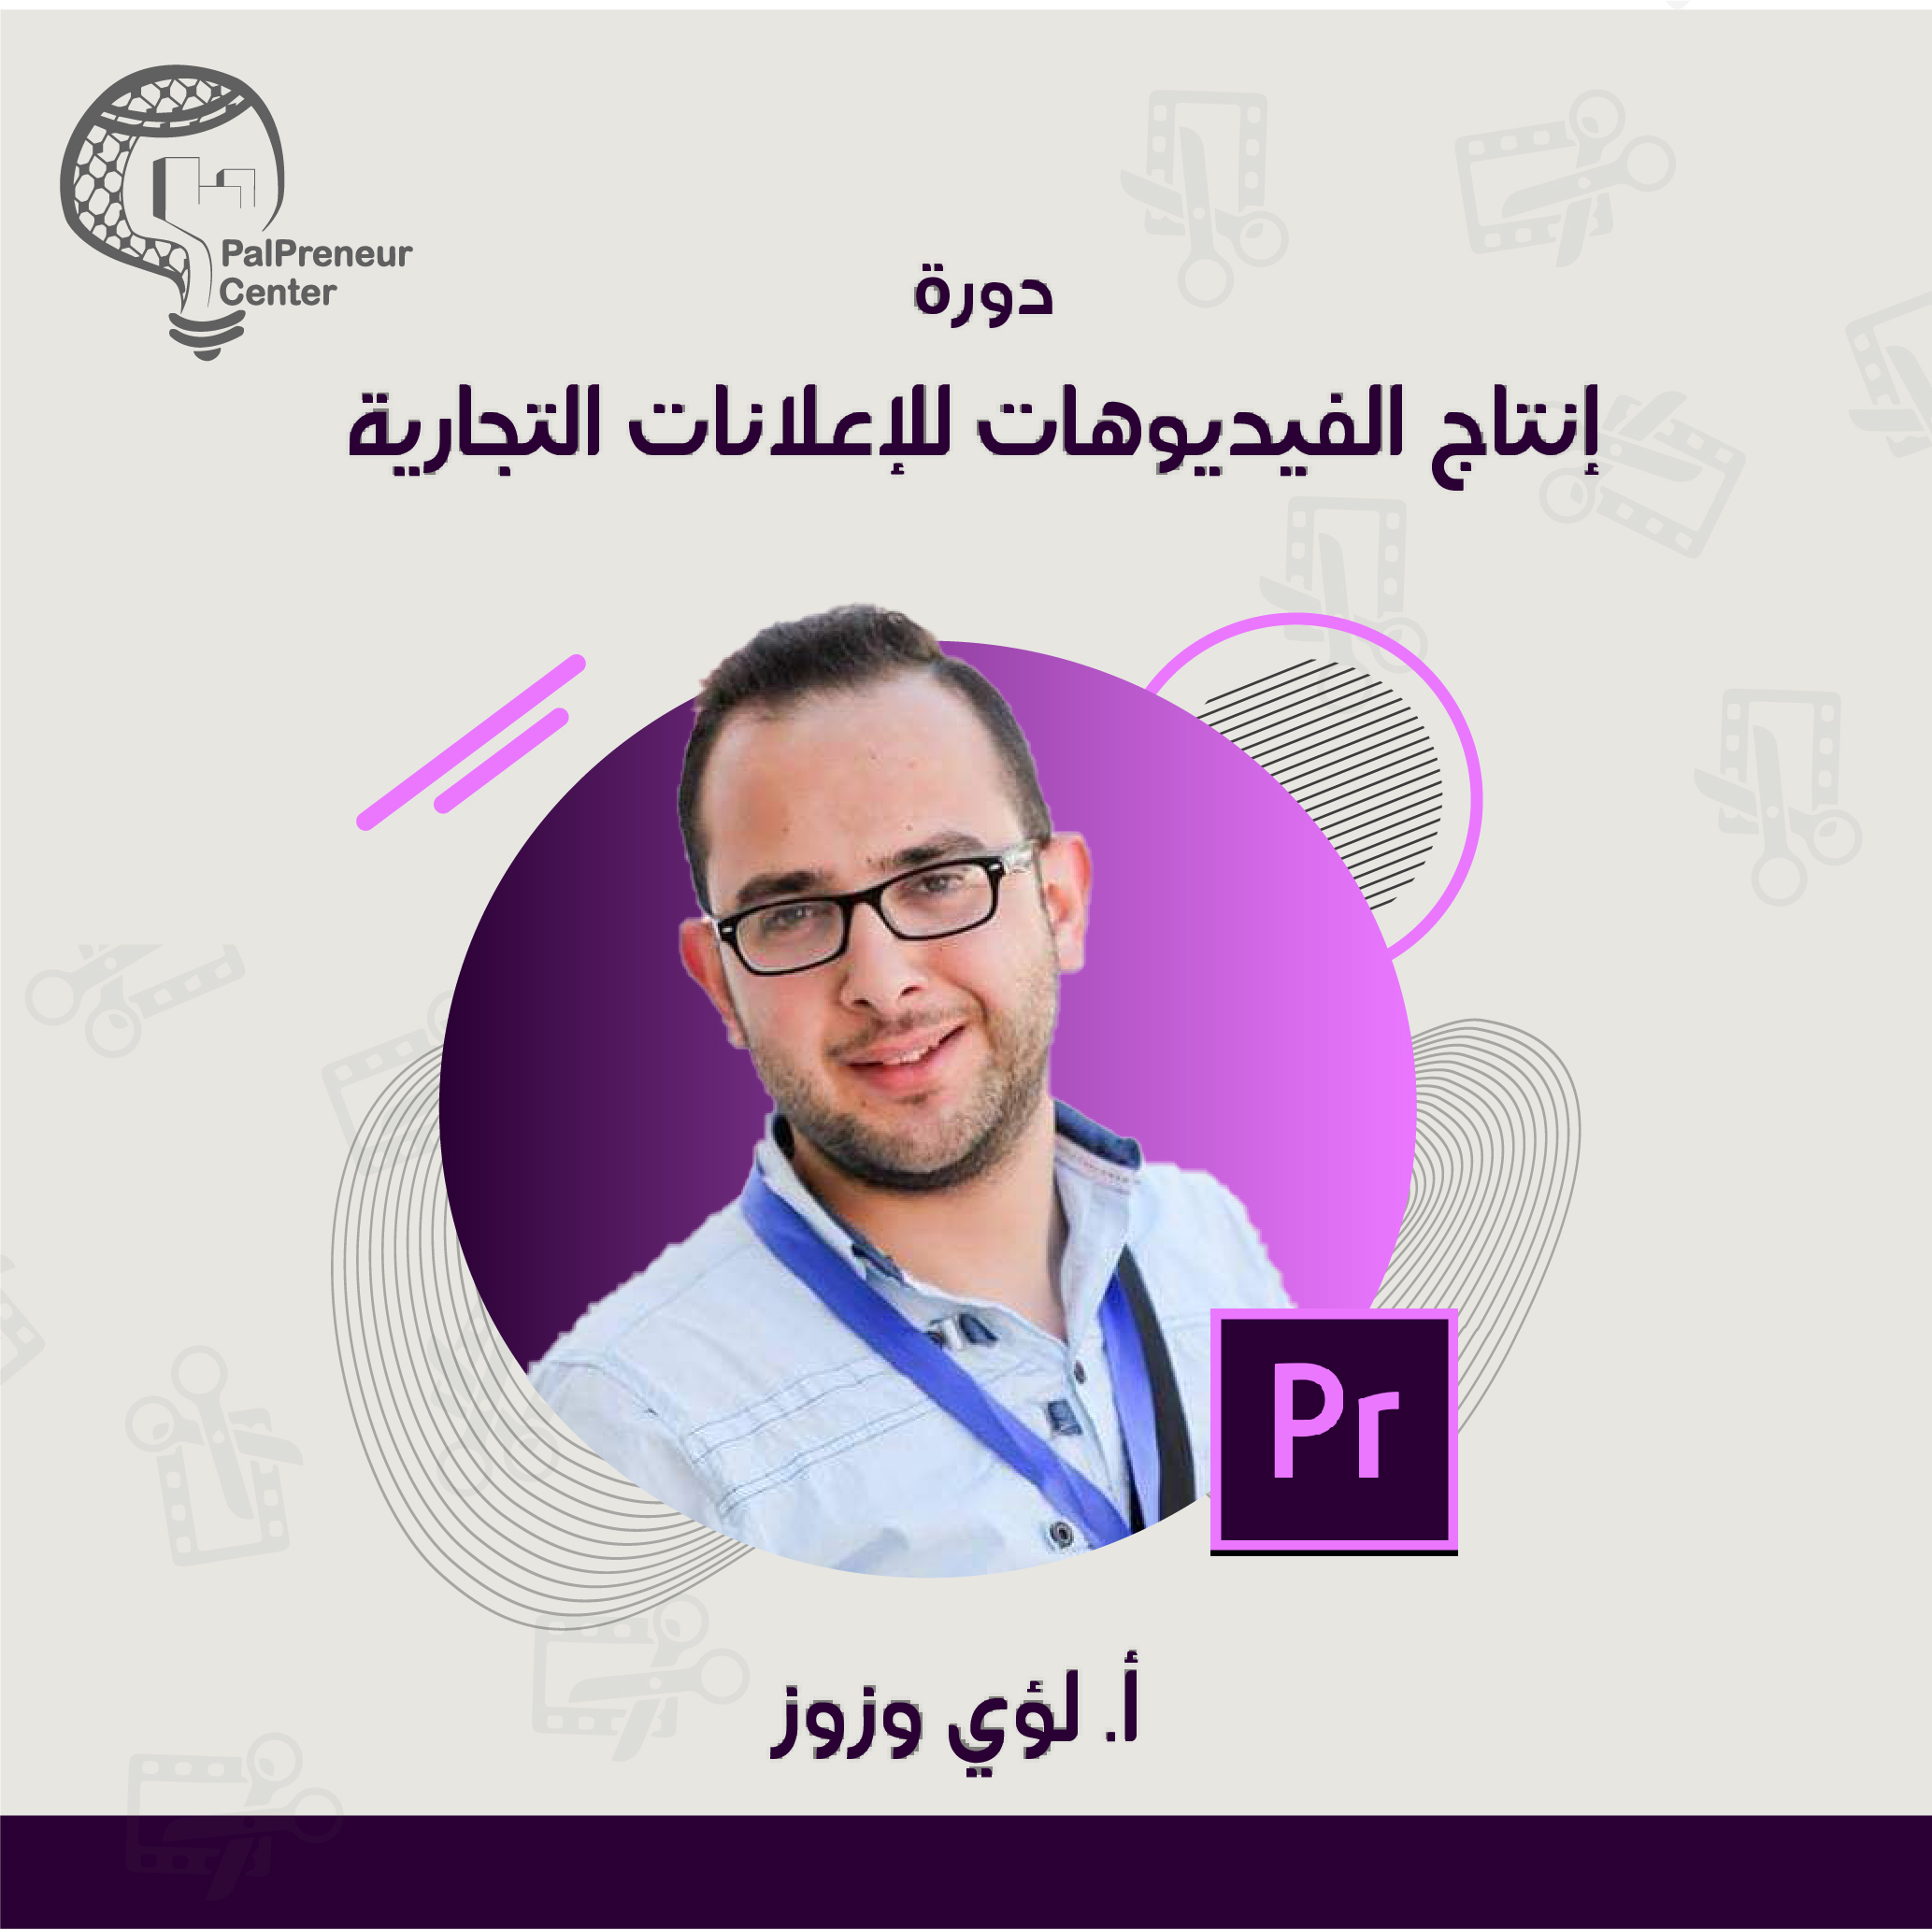 Adobe Premiere | PalPreneur Center for Training, Consultancy and Research